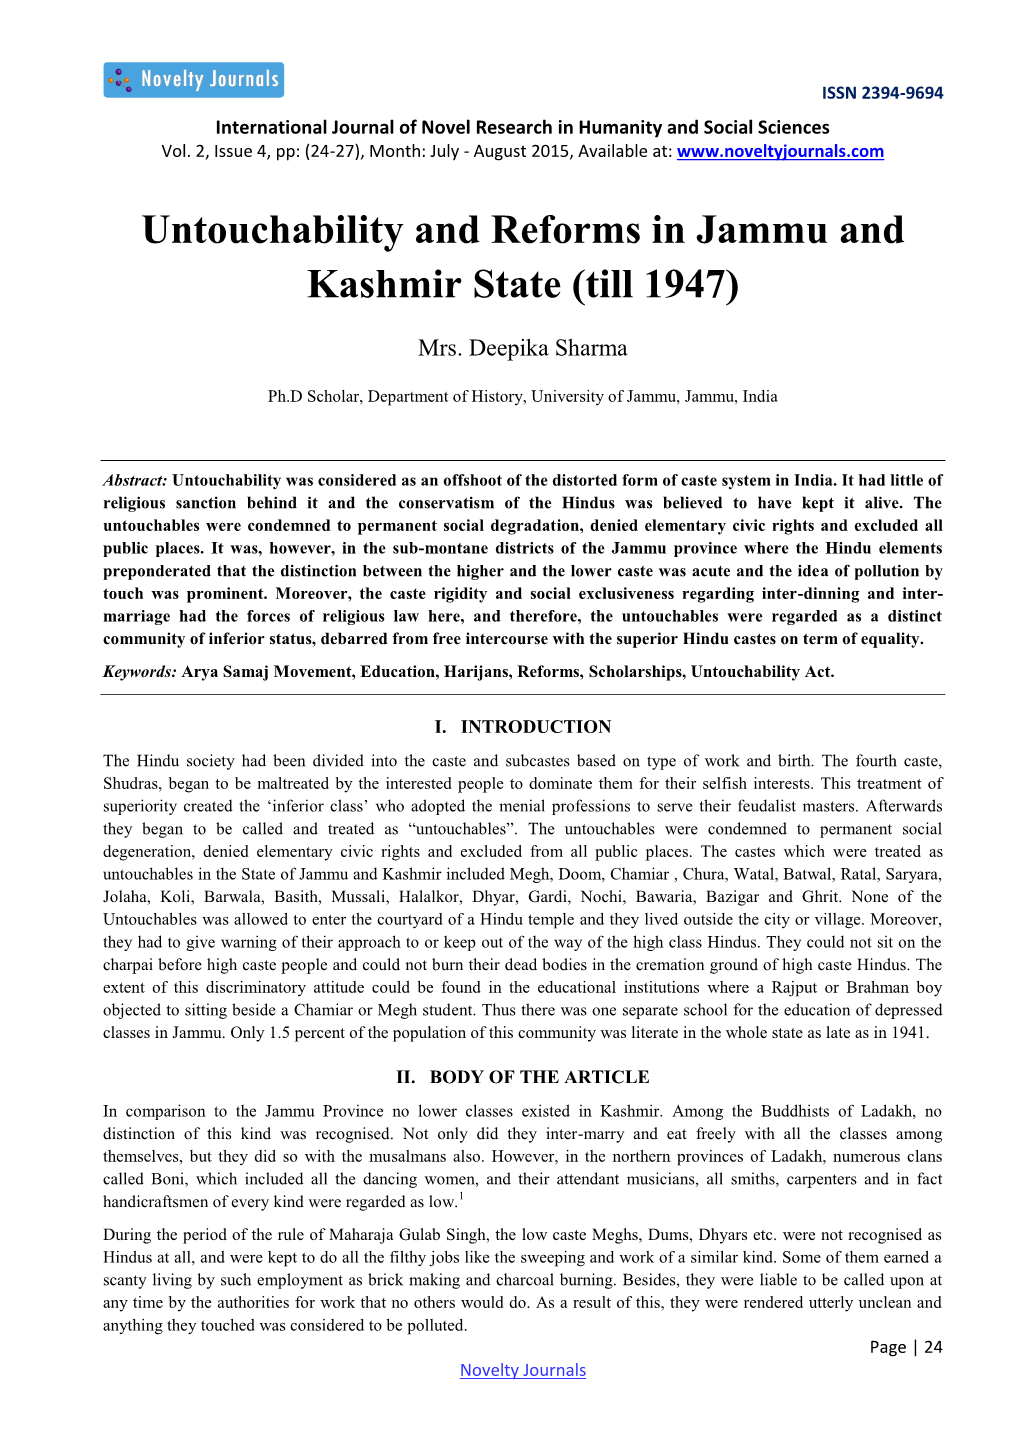 Untouchability and Reforms in Jammu and Kashmir State (Till 1947)